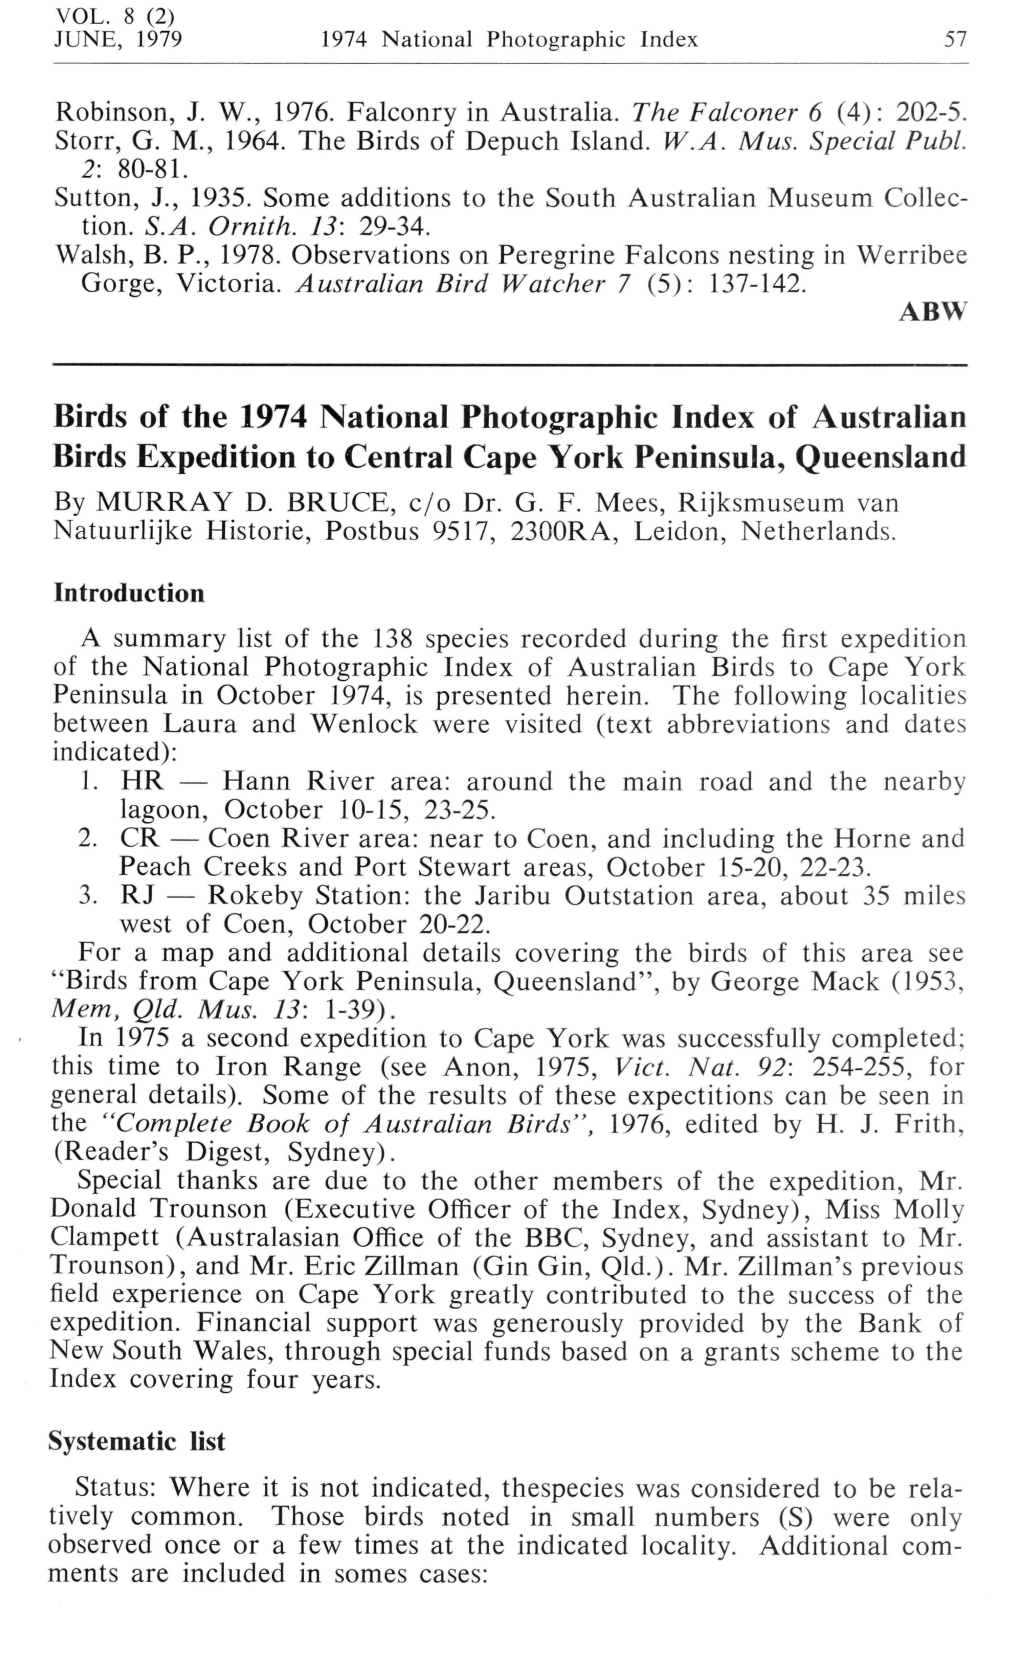 Birds of the 1974 National Photographic Index of Australian Birds Expedition to Central Cape York Peninsula, Queensland by MURRAY D